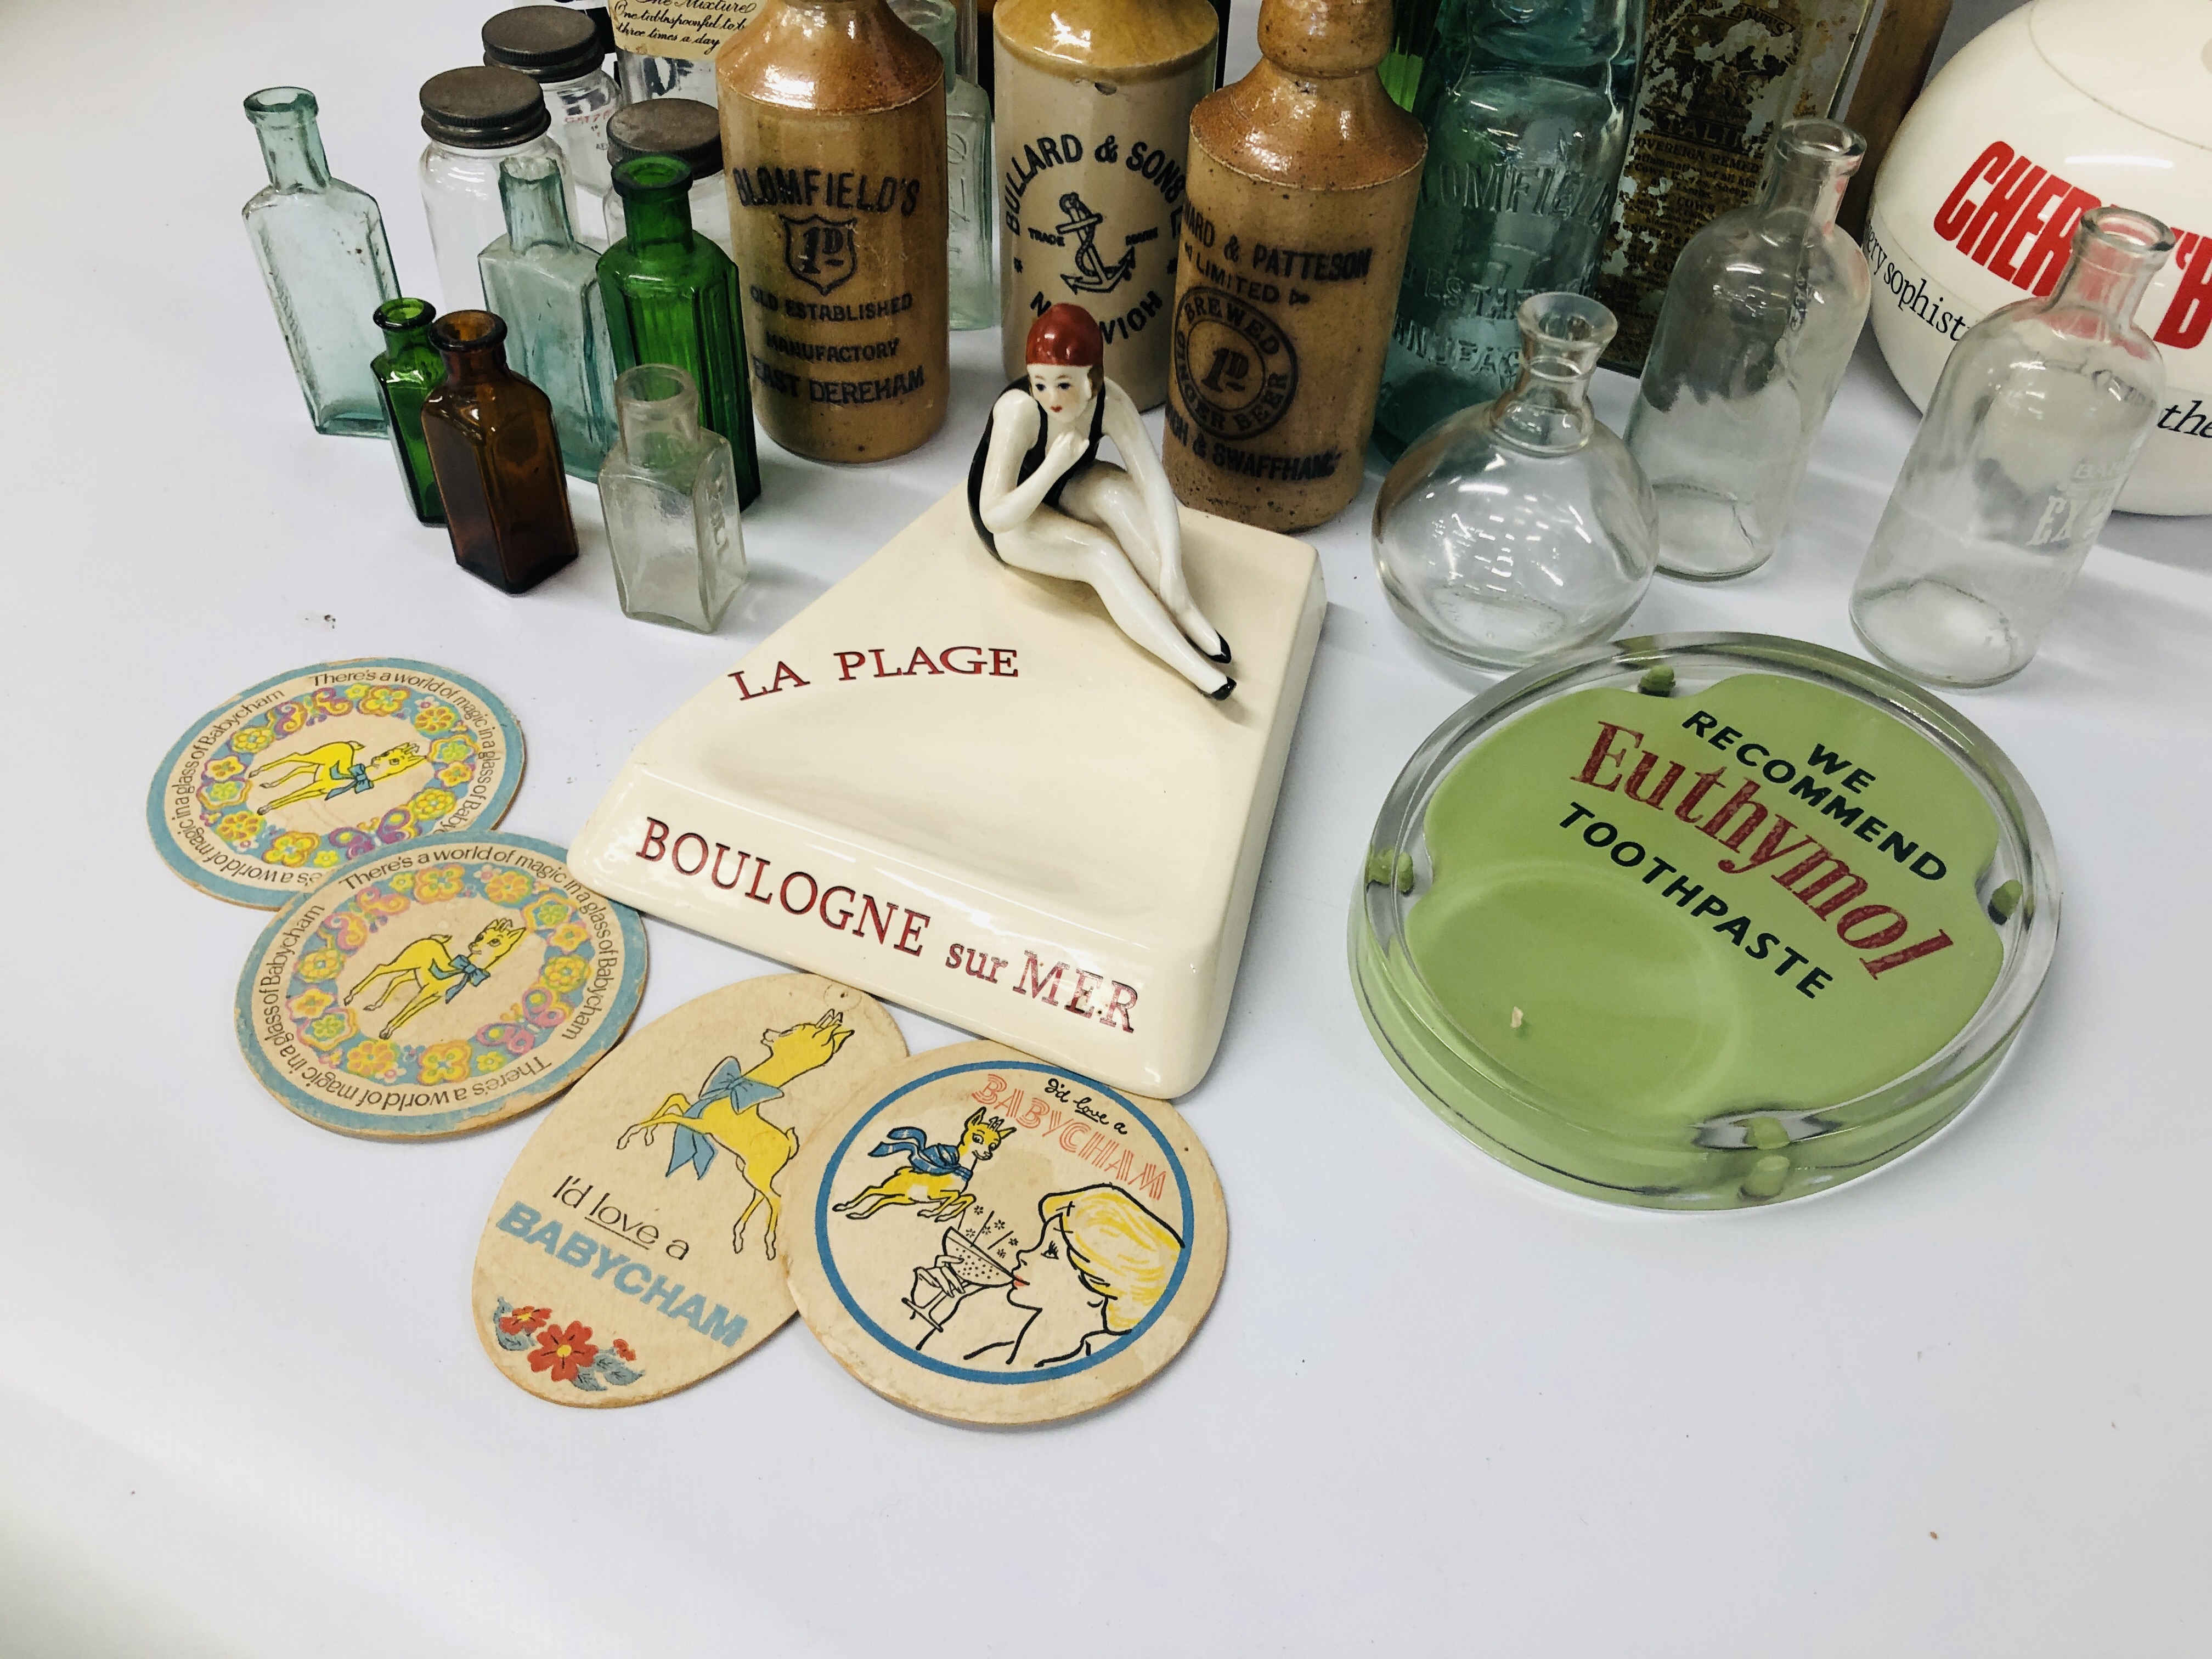 A SMALL COLLECTION OF ANTIQUE GLASS BOTTLES INCLUDING ALLY, MILK, MEDICINE, ETC. - Image 9 of 9